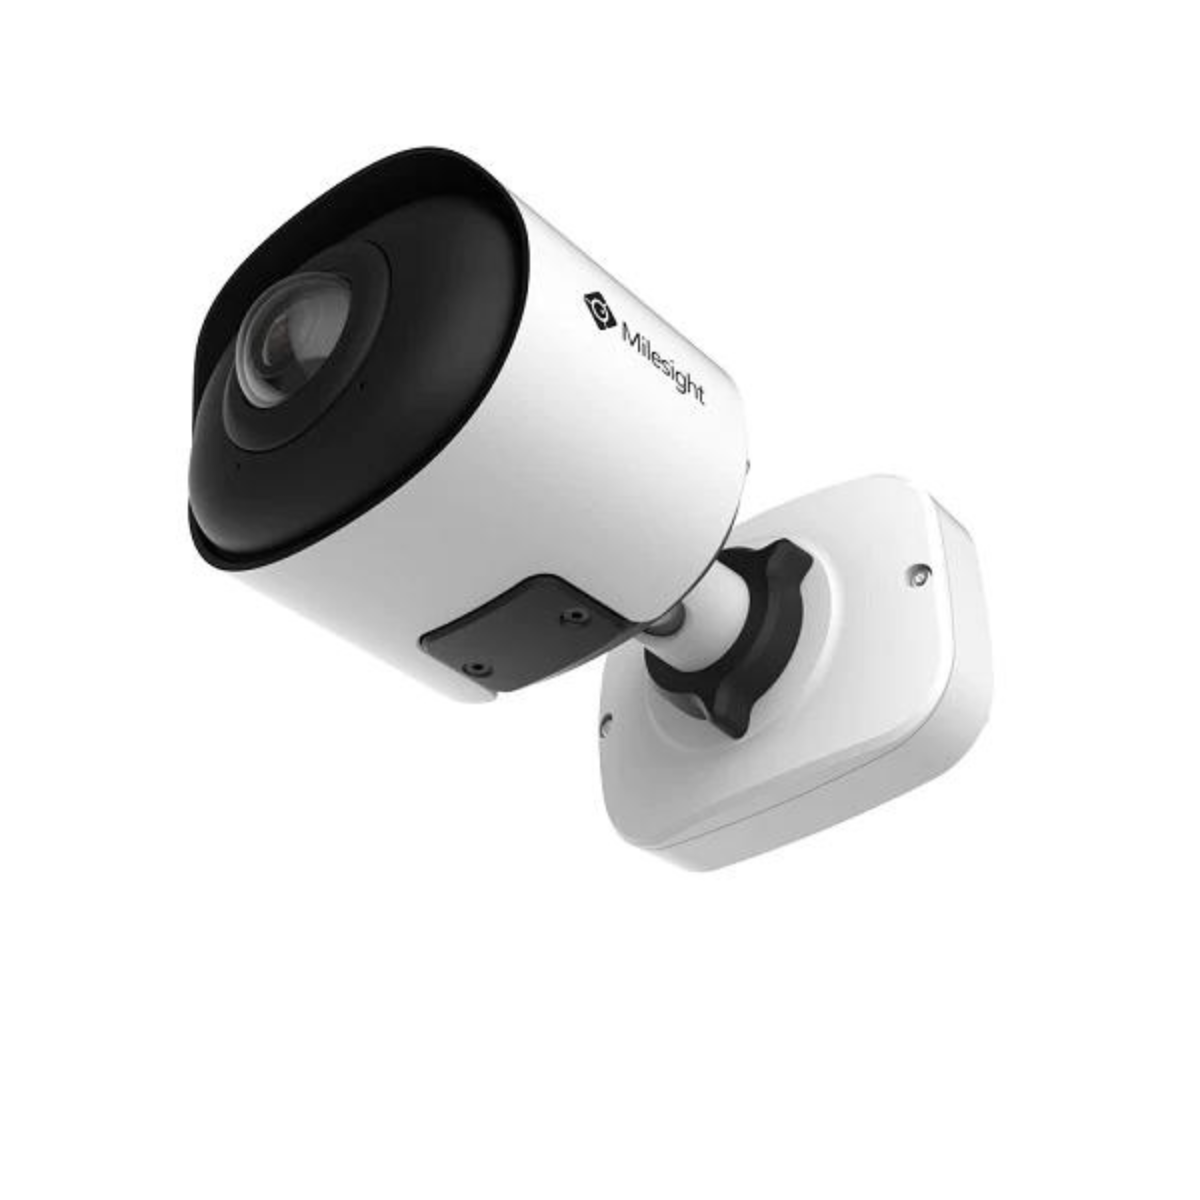 "High-Resolution Mini Bullet Camera with Motorized Lens for Smooth Video Capture"